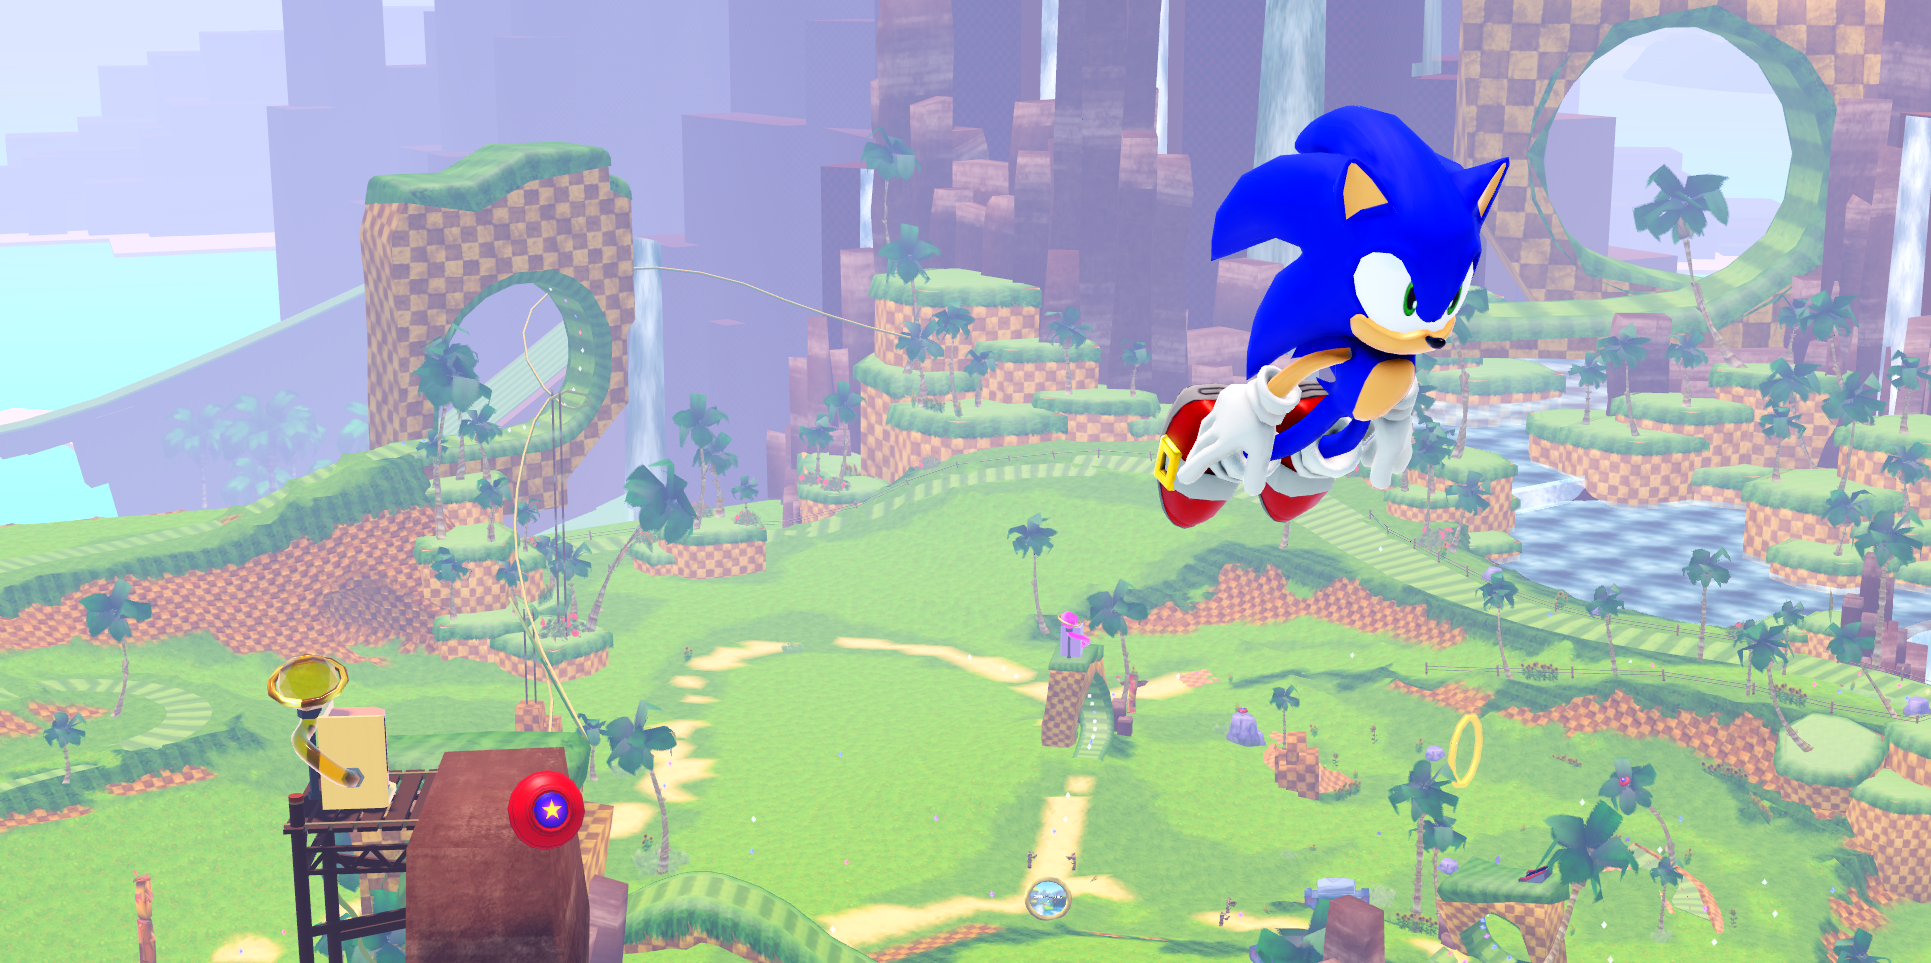 Gamefam Studios on X: Sonic Speed Simulator #SonicRoblox UPDATE #3 - Hill  Top! ◉ Hill Top ◉ New Badge System ◉ New Chao & Trails ◉ New Mega Exclusive  Berry Chao and